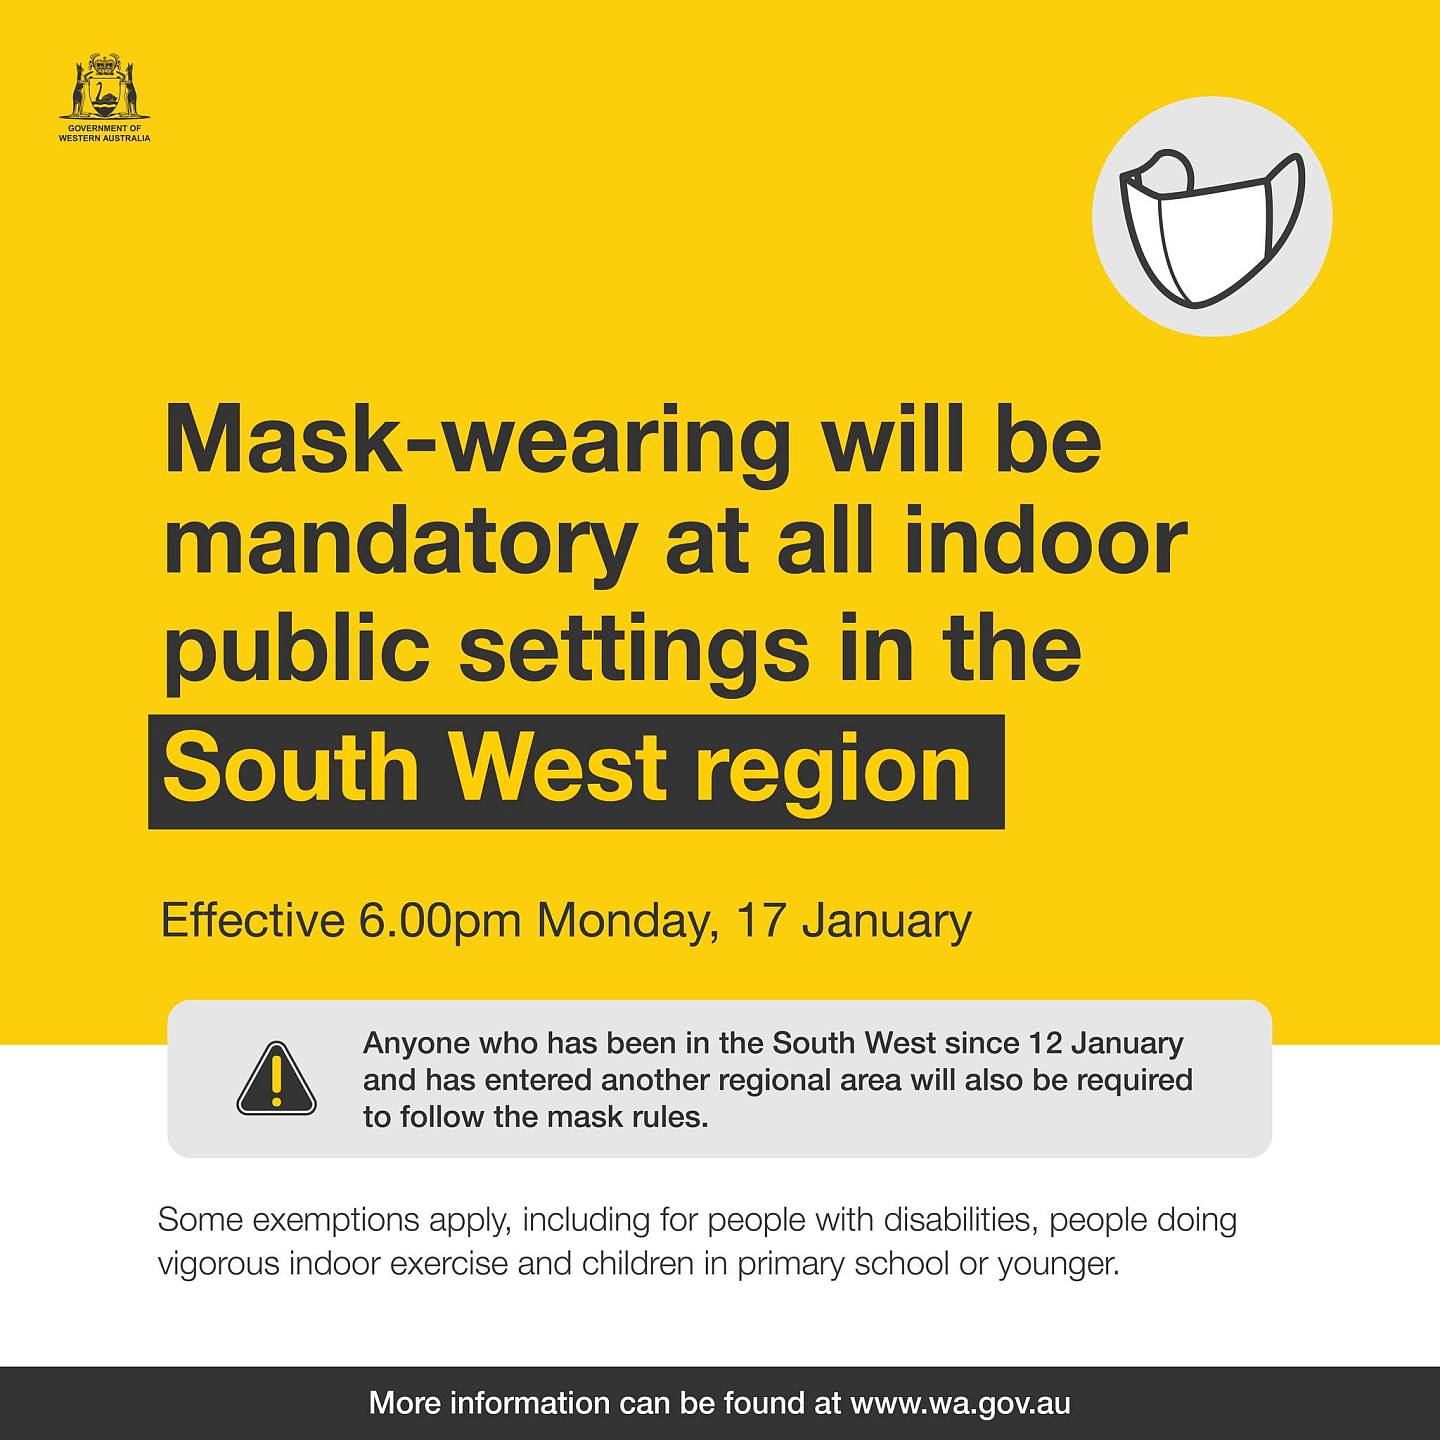 May be an image of text that says '골거 Mask-wearing will be mandatory at all indoor public settings in the South West region Effective 6.00pm Monday, 17 January Anyone who has been in the South West since 12 12 January and has entered another regional area will also be required to follow the mask rules. Some exemptions apply, including for poople with disabilitios, poople doing vigorous indoor exercise and children in primary school or younger. More information can be ound at www.wa.gov.au'